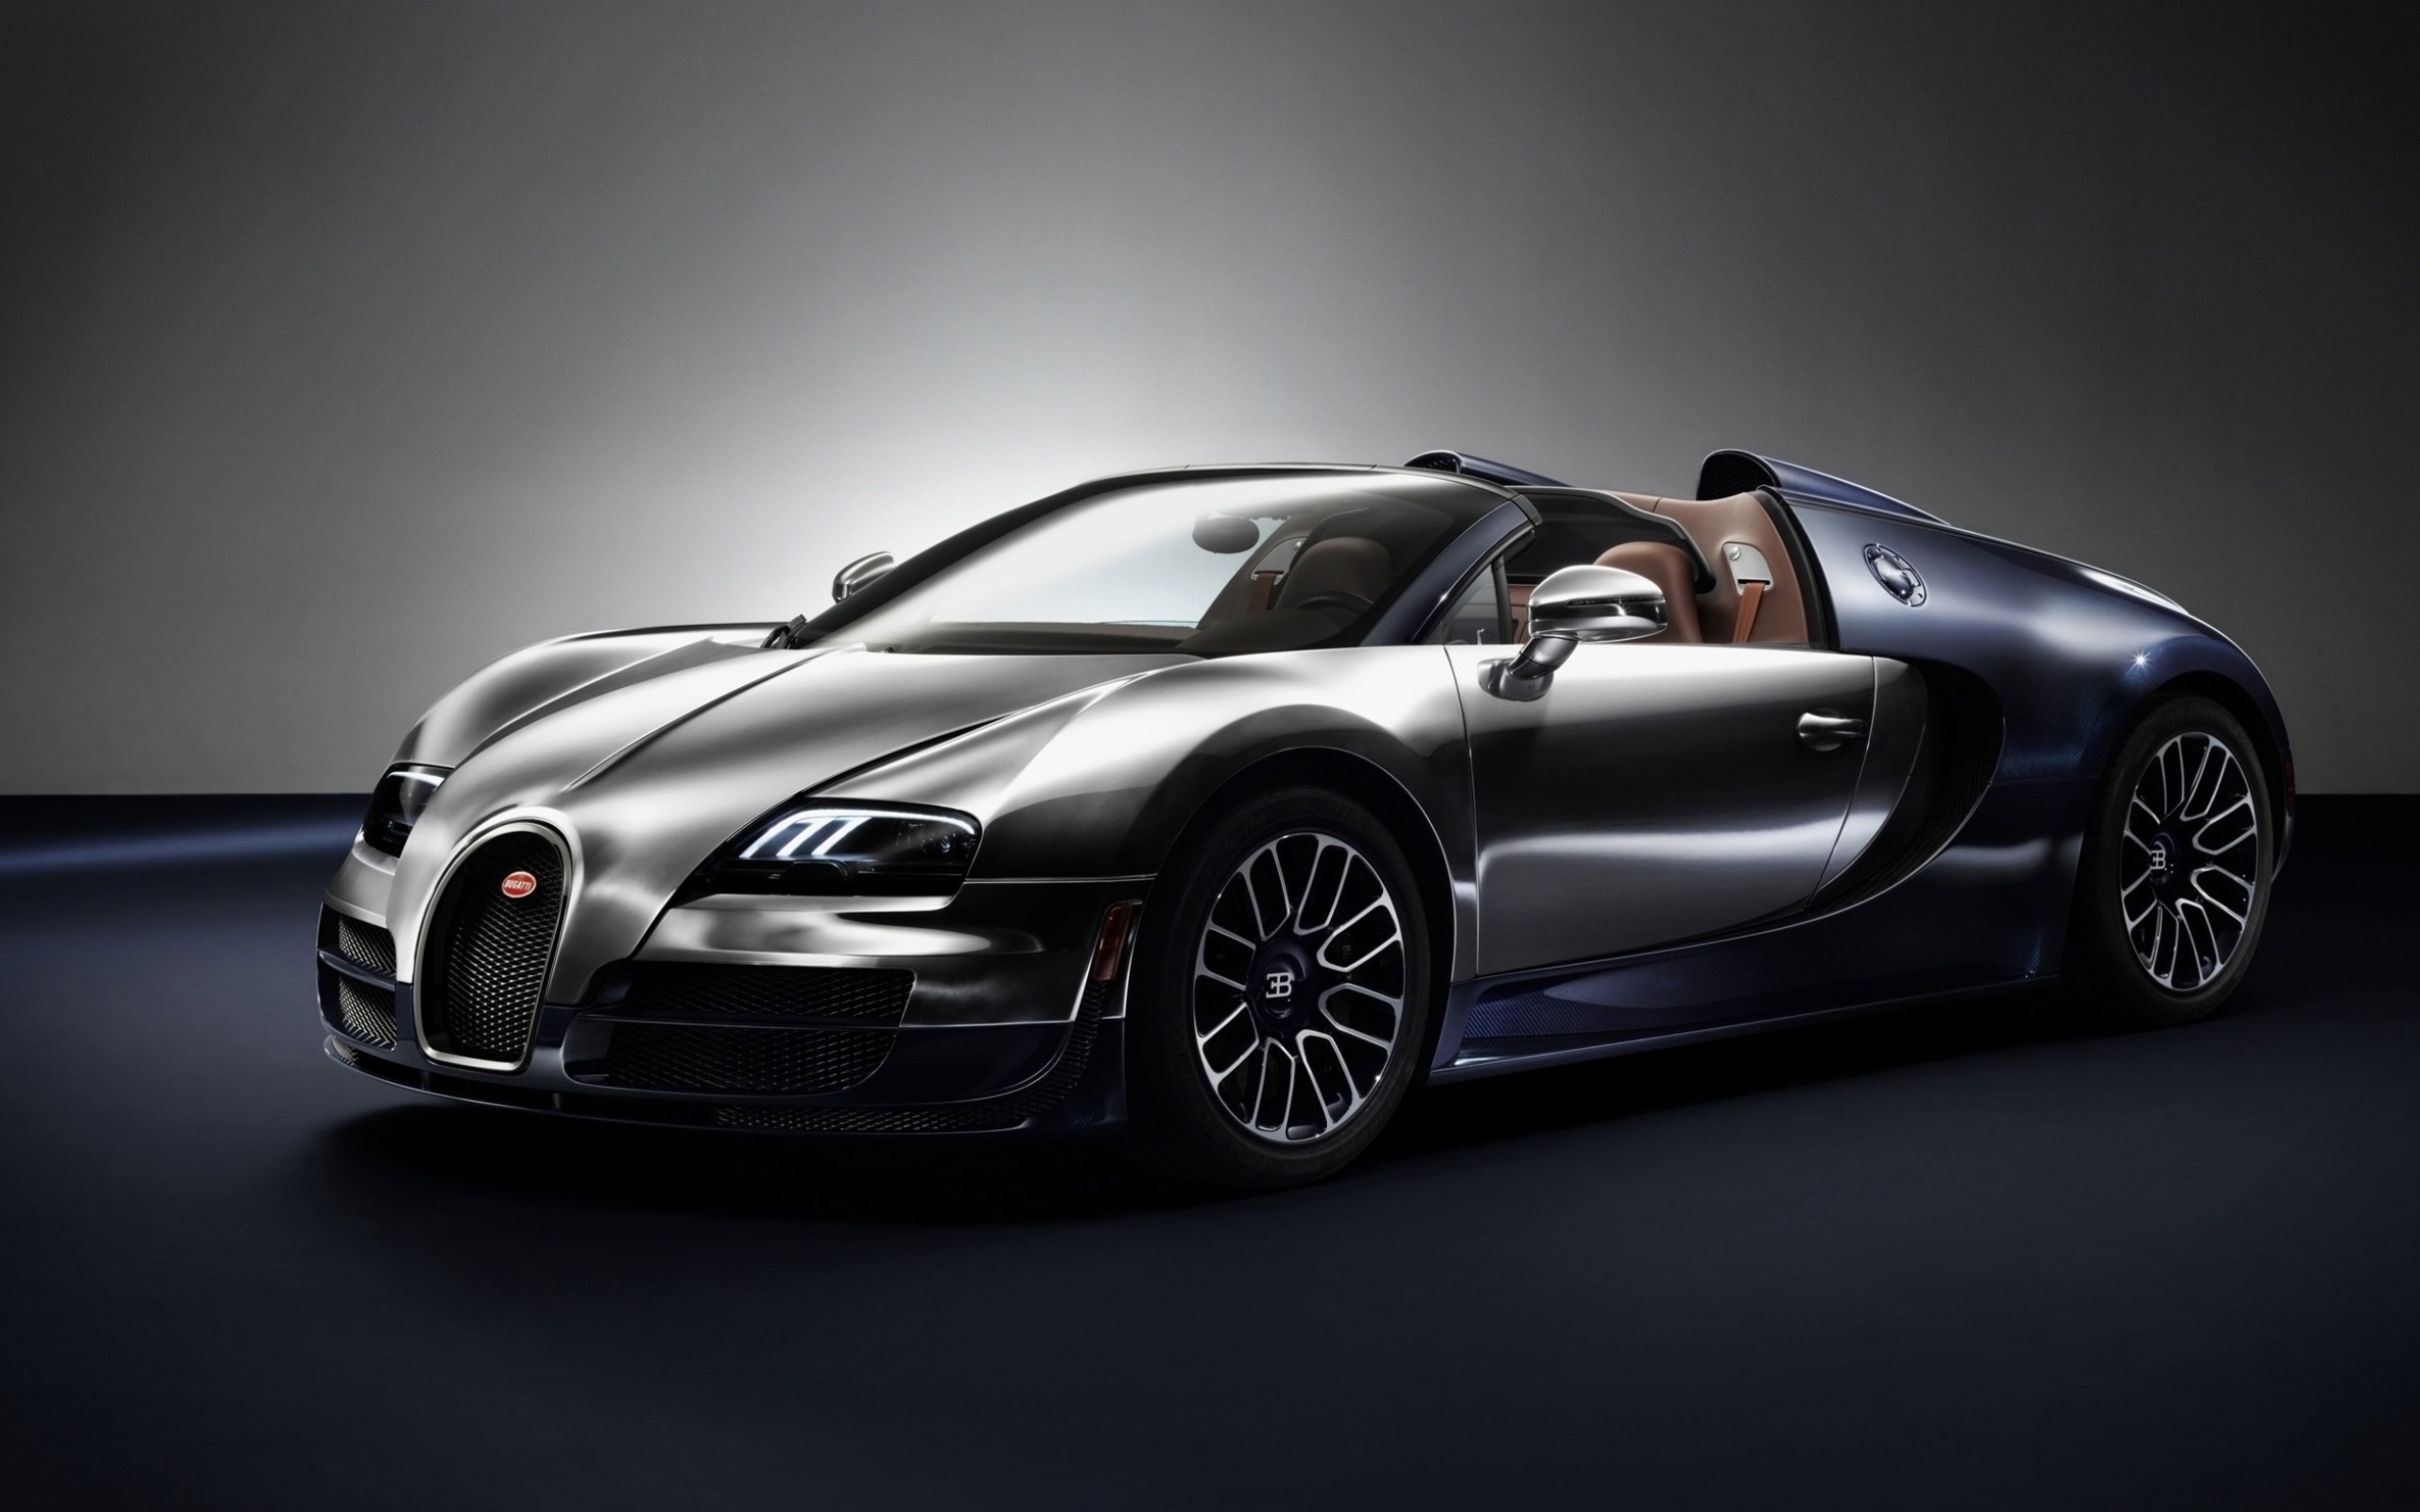 Bugatti Veyron Wallpapers, Pictures, Images